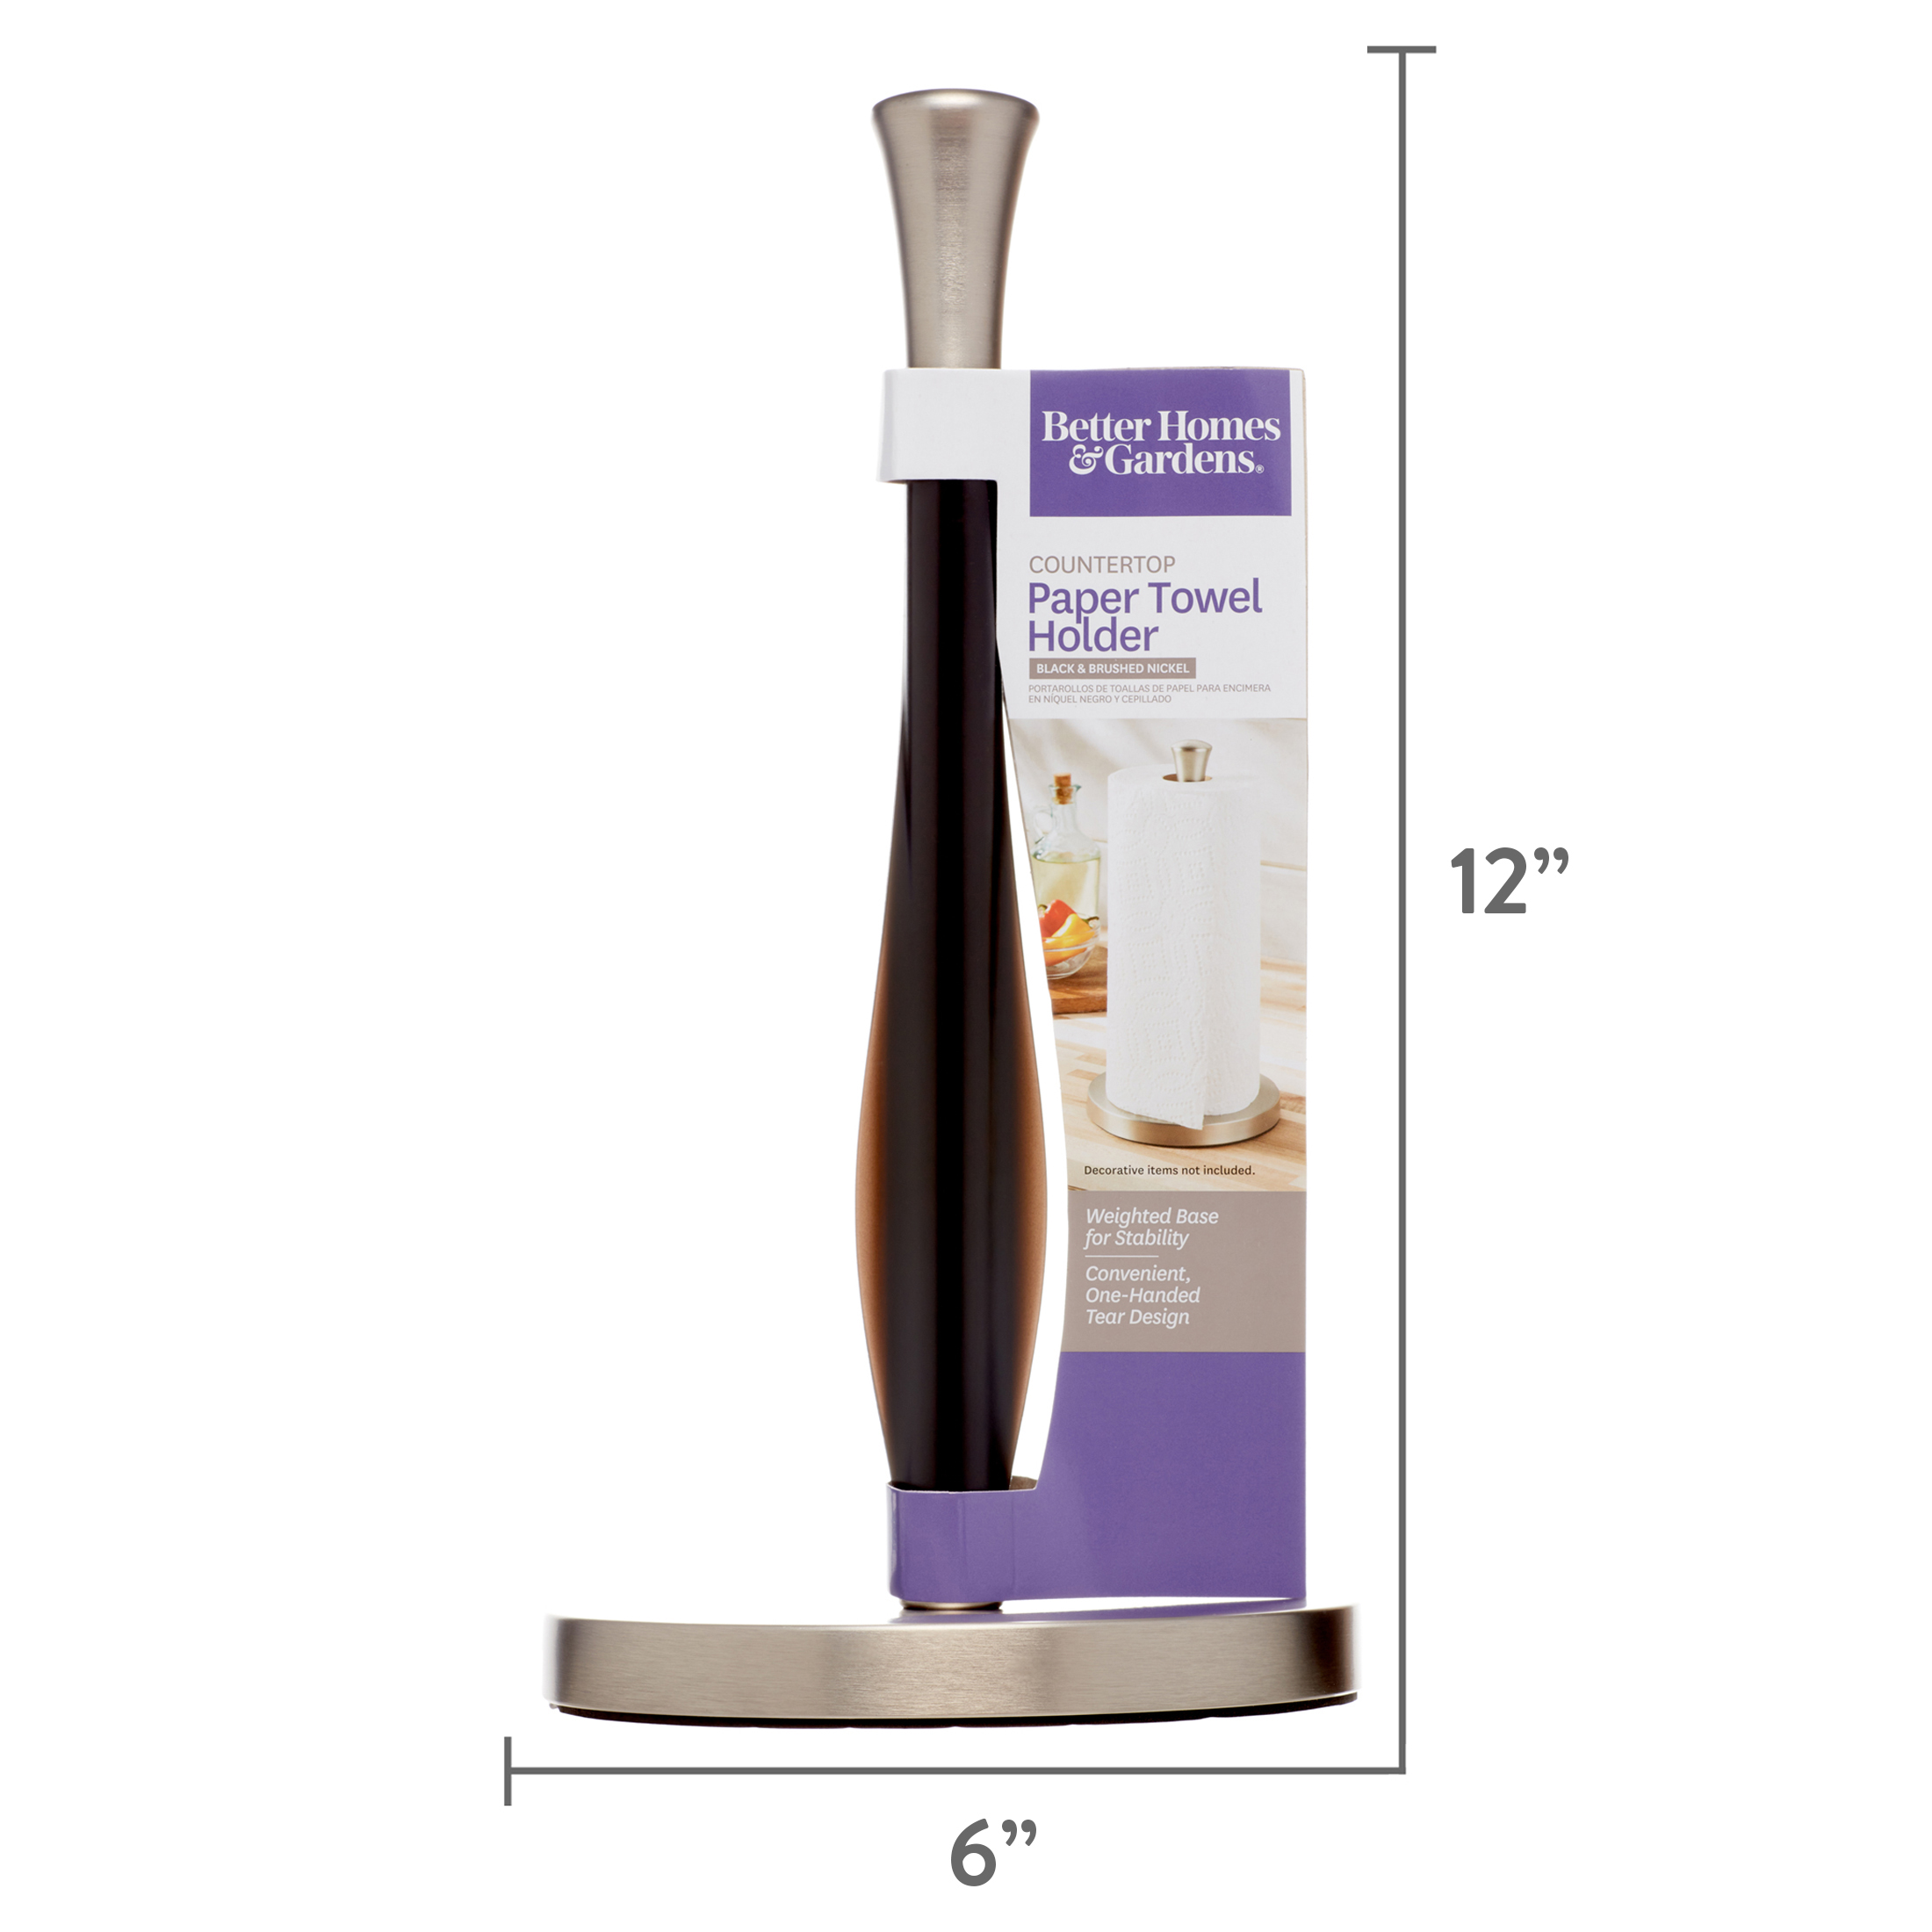 Better Homes & Gardens Free-Standing Paper Towel Holder with Weighted Non-Slip Base, 14 Inch, Nickel - image 4 of 7